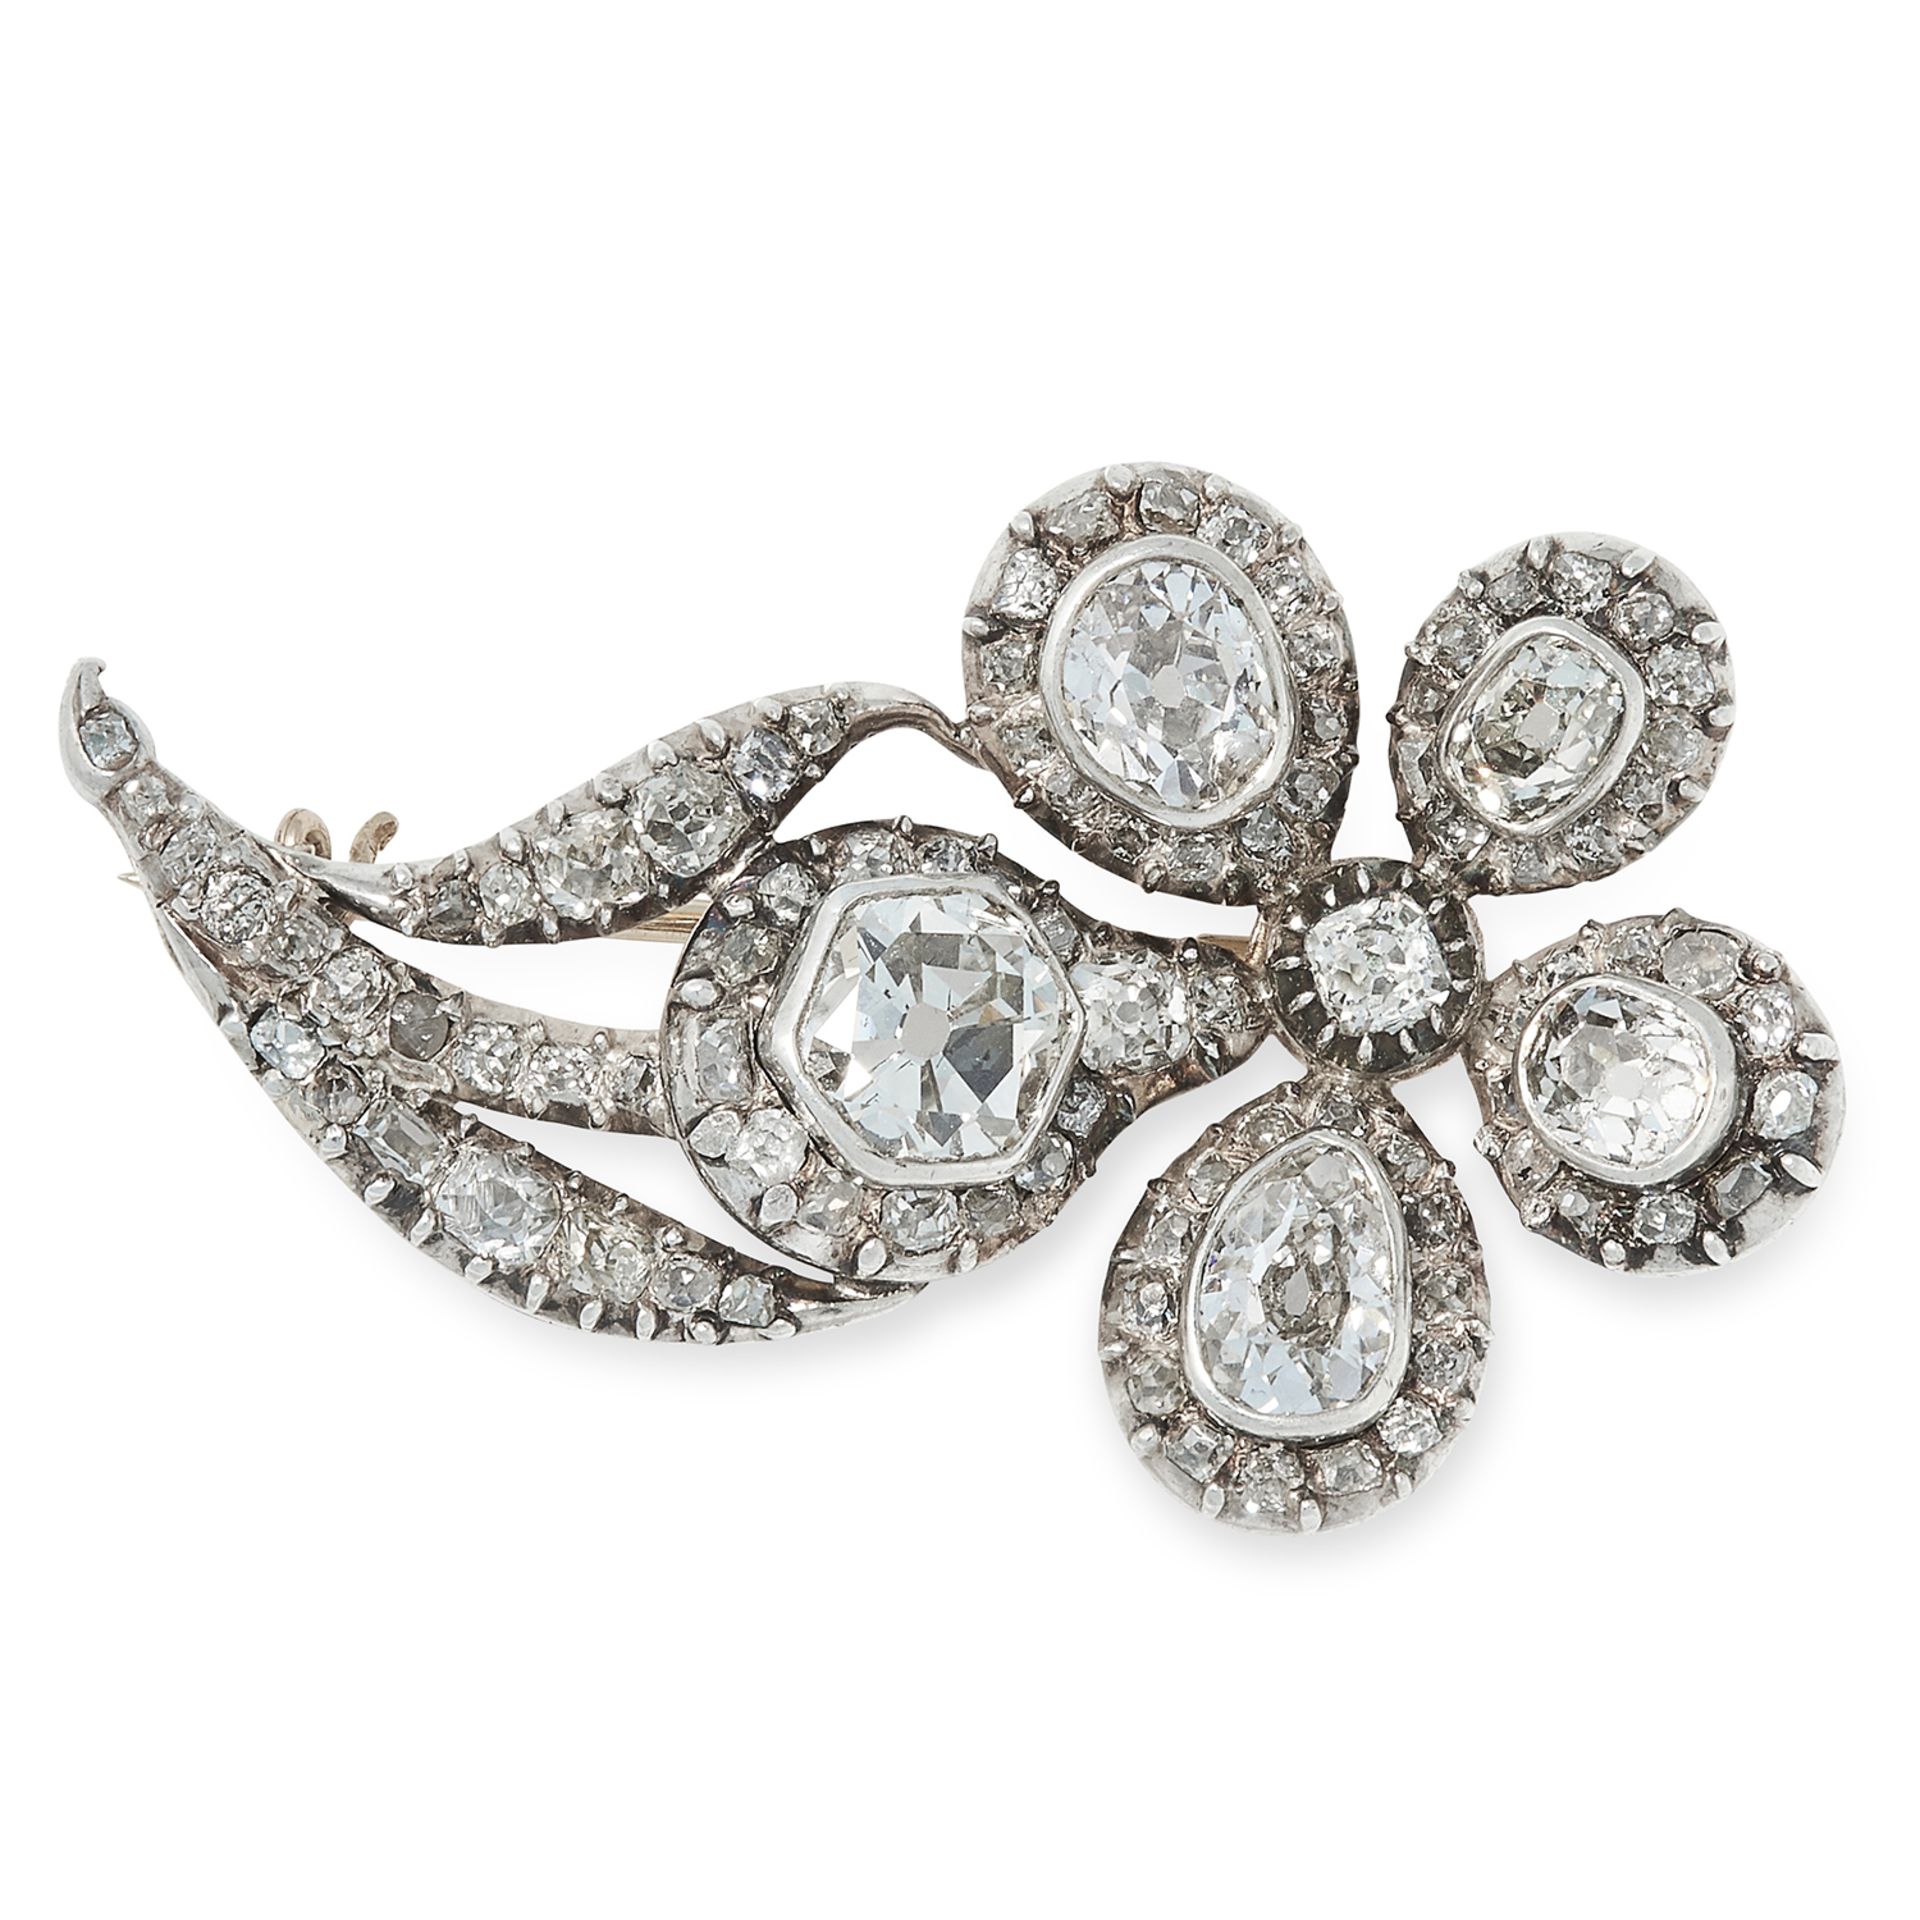 ANTIQUE DIAMOND FLOWER BROOCH set with old cut diamonds totalling approximately 4.50 carats, 4.